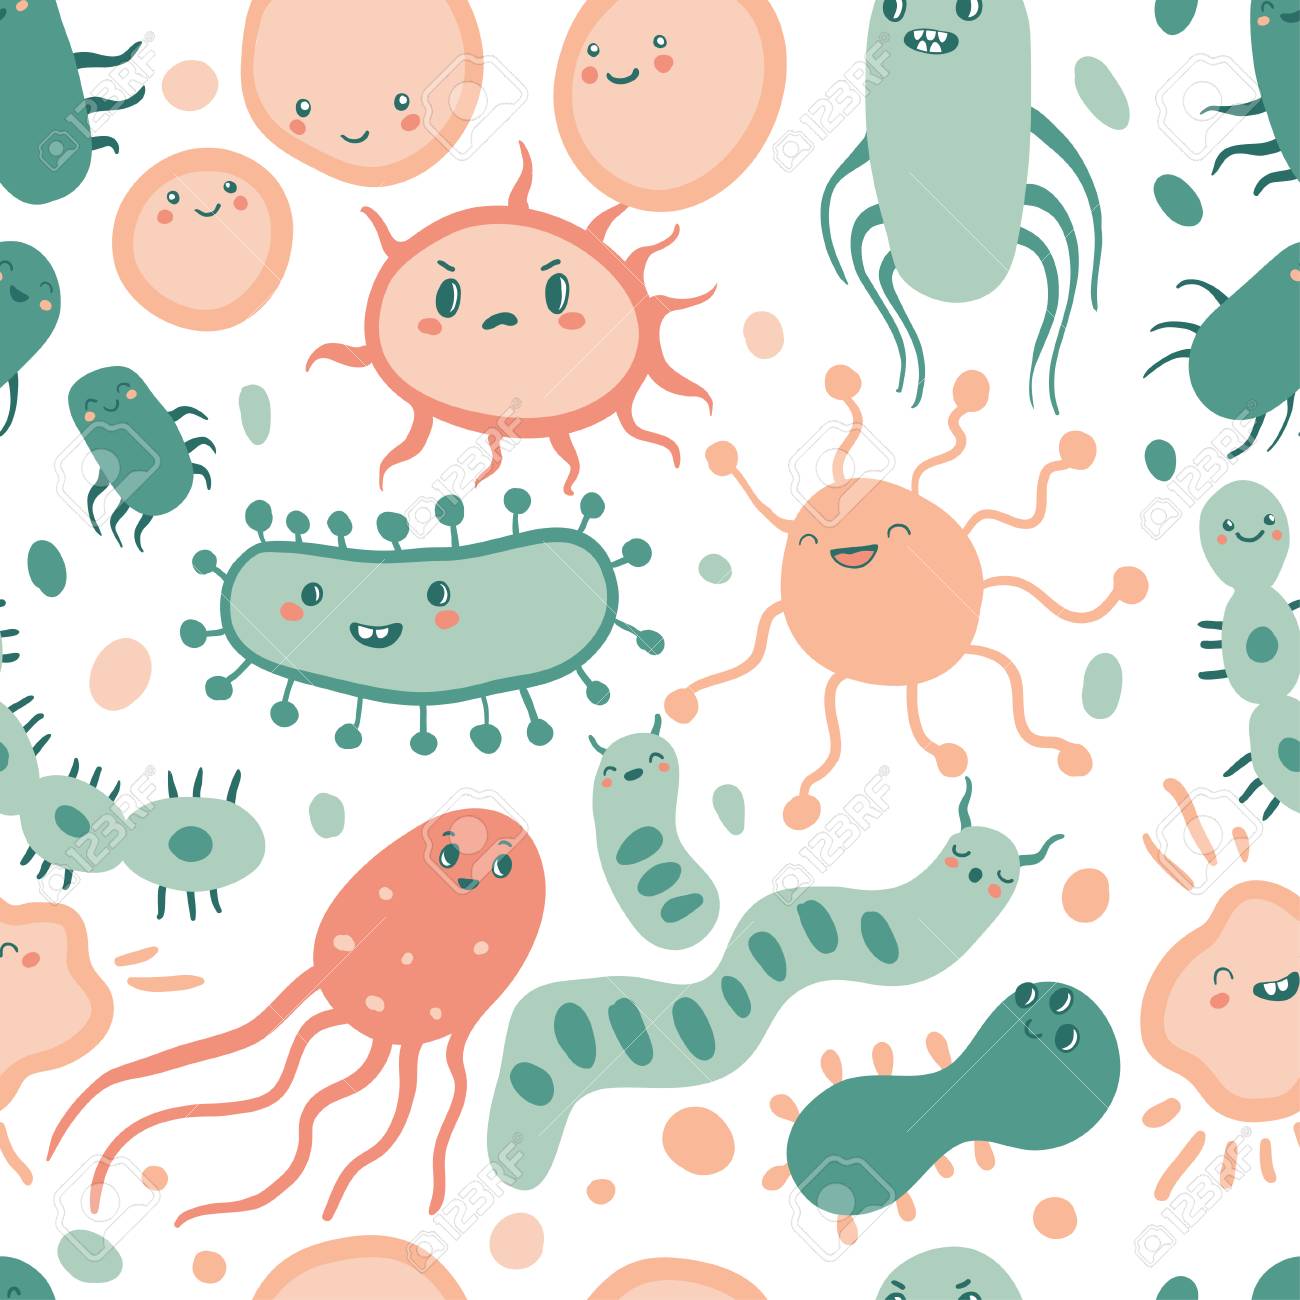 Cute Germ Characters Seamless Pattern Background With Bacteria